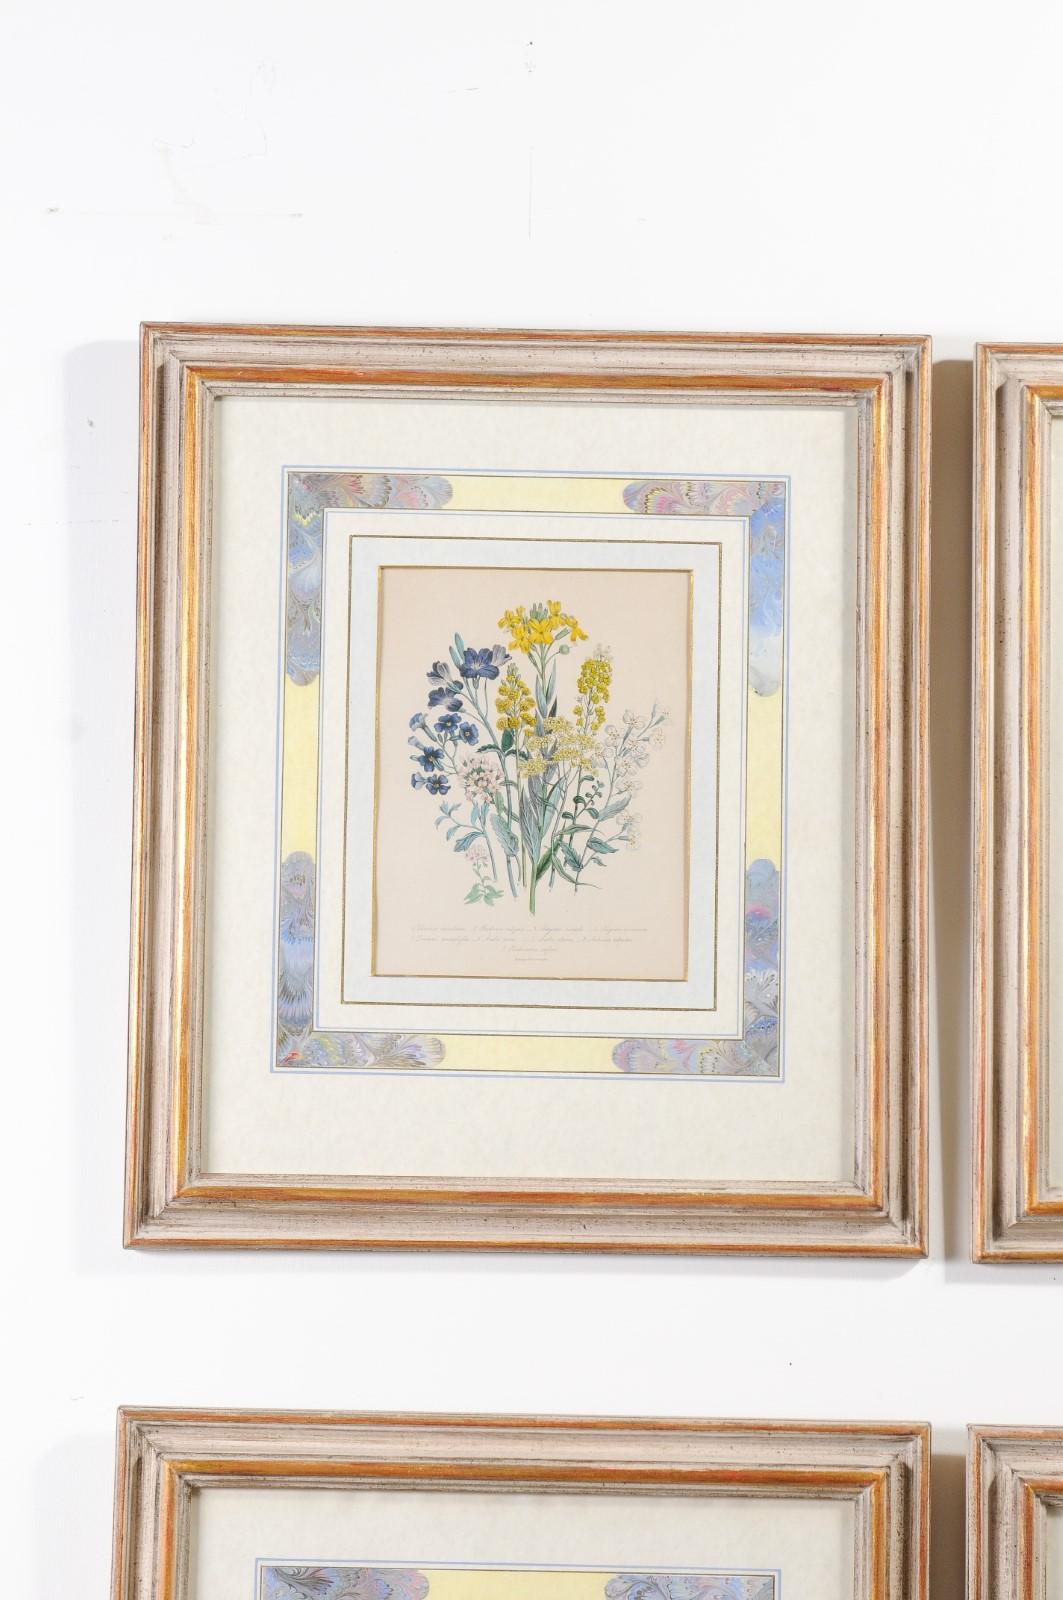 Two Pairs of Original English Hand-Colored Floral Lithographs by Jane London For Sale 3